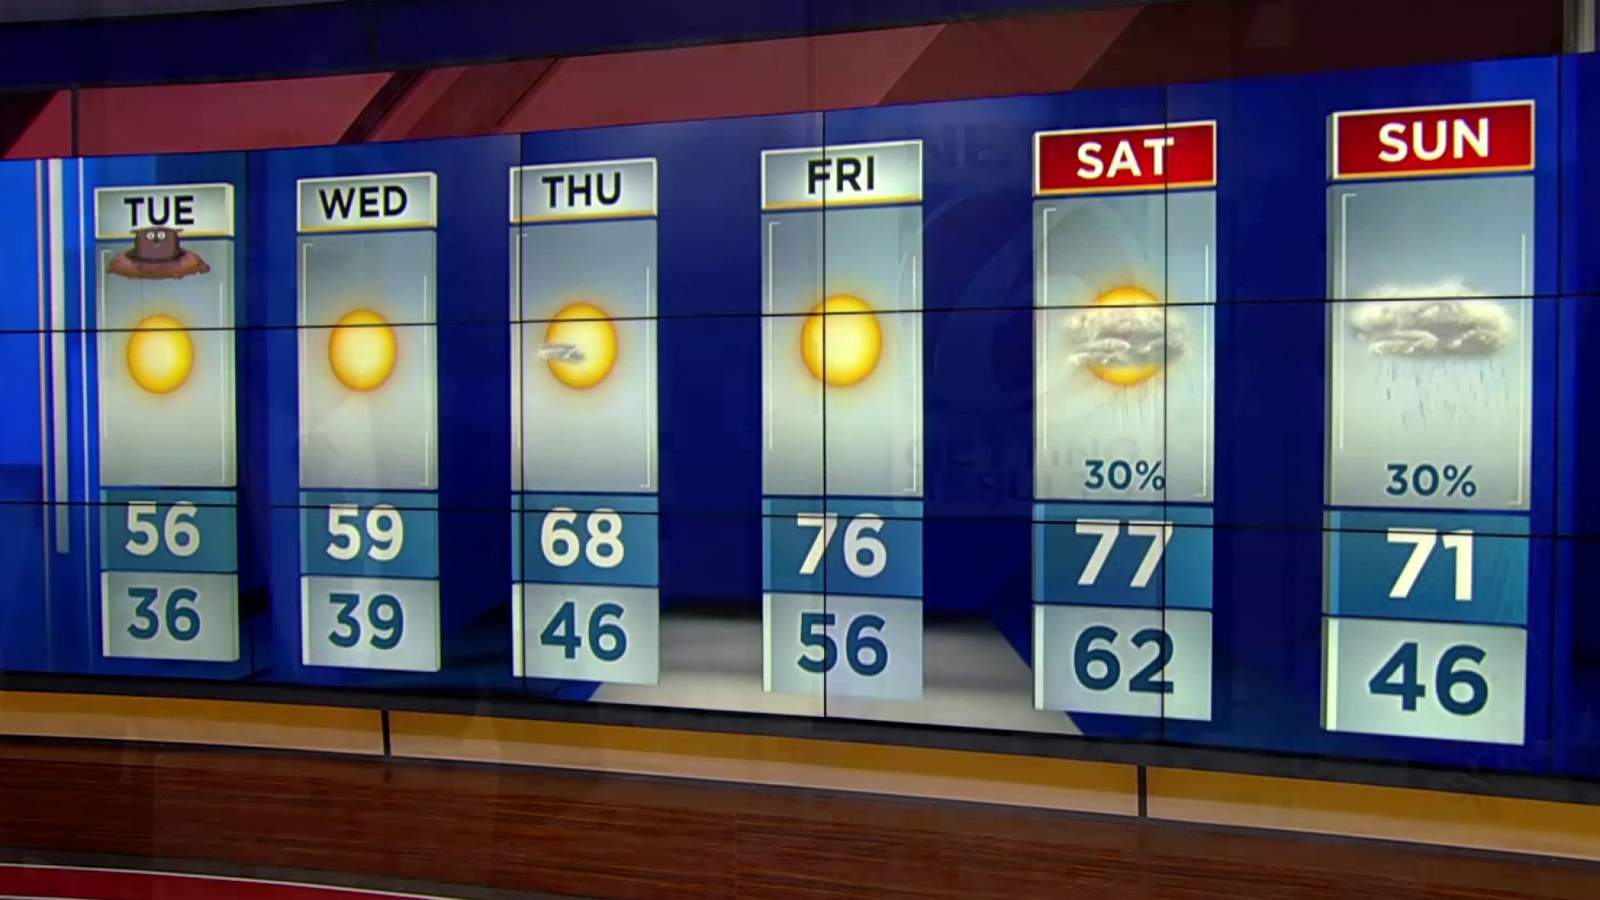 Temperatures expected to drop into the 30s in Central Florida